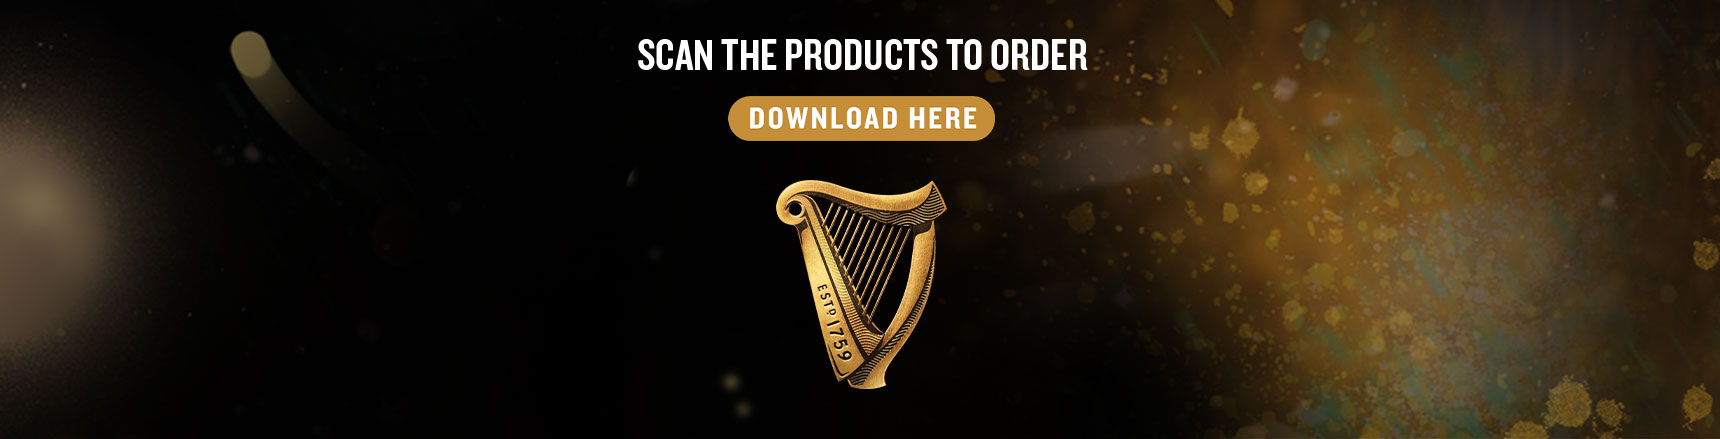 Scan the products to order - Download here